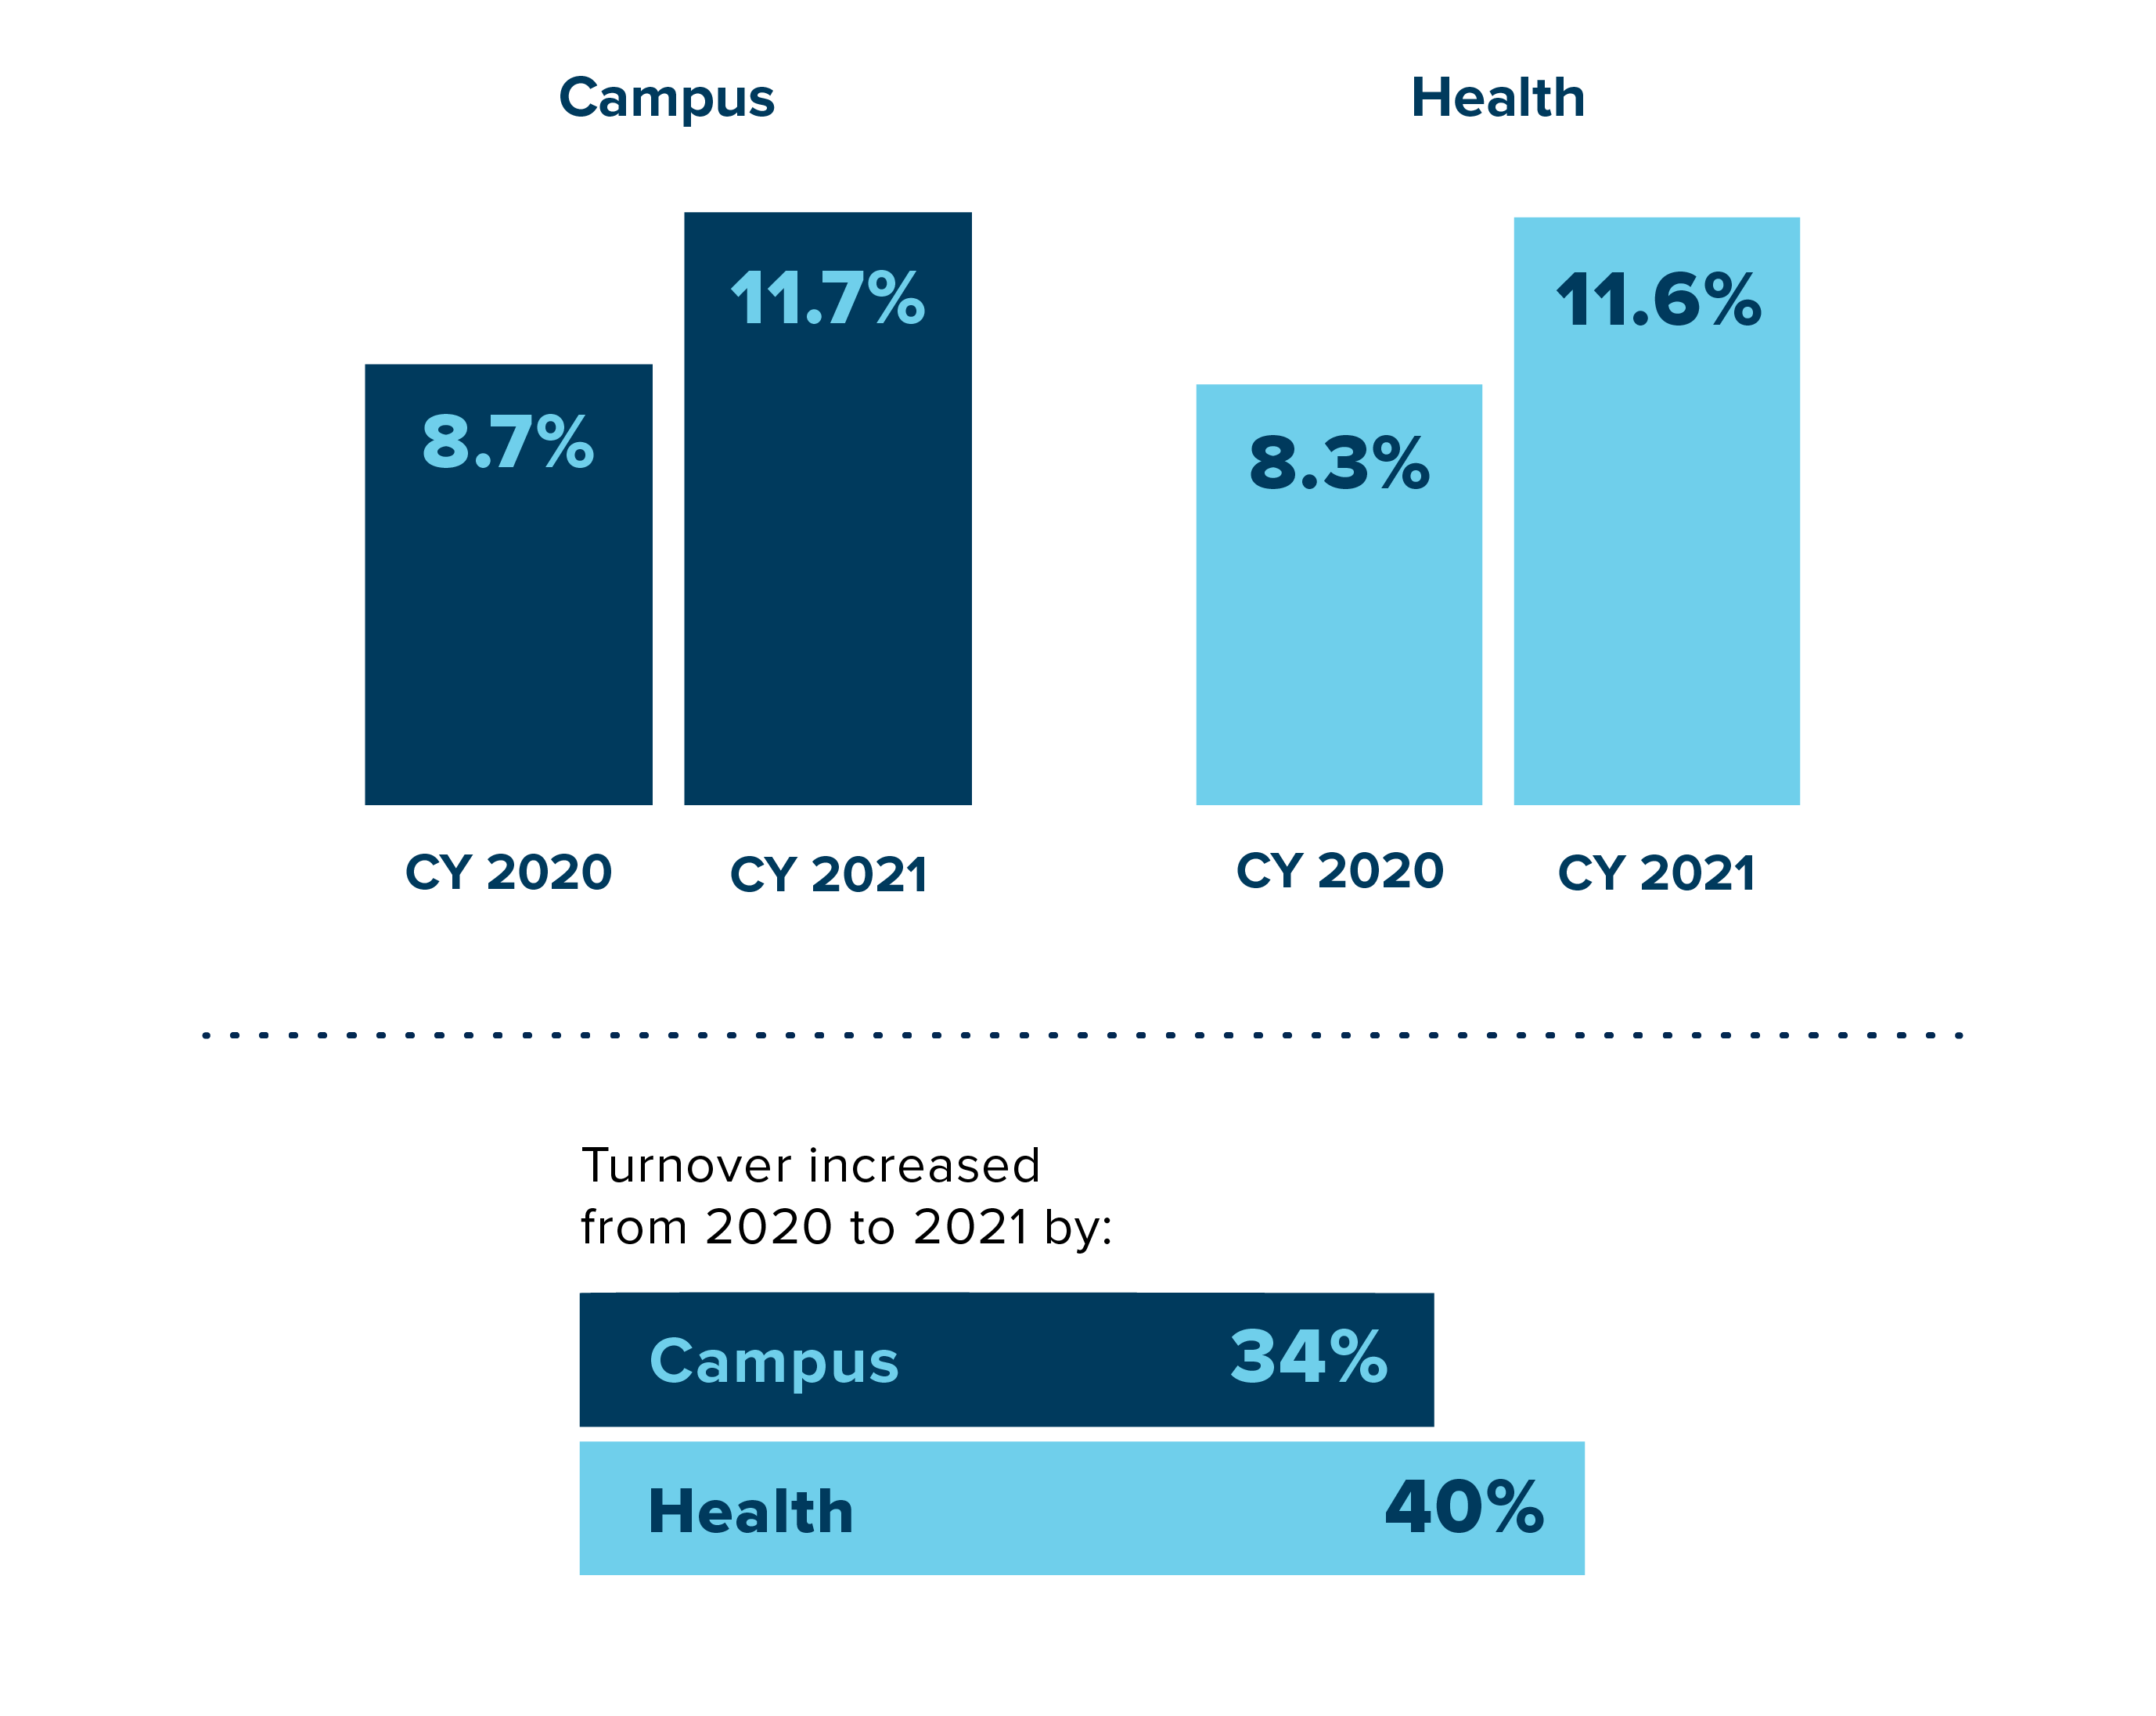 Campus separation rate increased from 8.7% in calendar year 2020 to 11.7% in 2021. UC Davis Health separation rate increased from 8.3% in 2020 to 11.6% in 2021. Turnover increased from 2020 to 2021 by 34% for campus and 40% for Health.